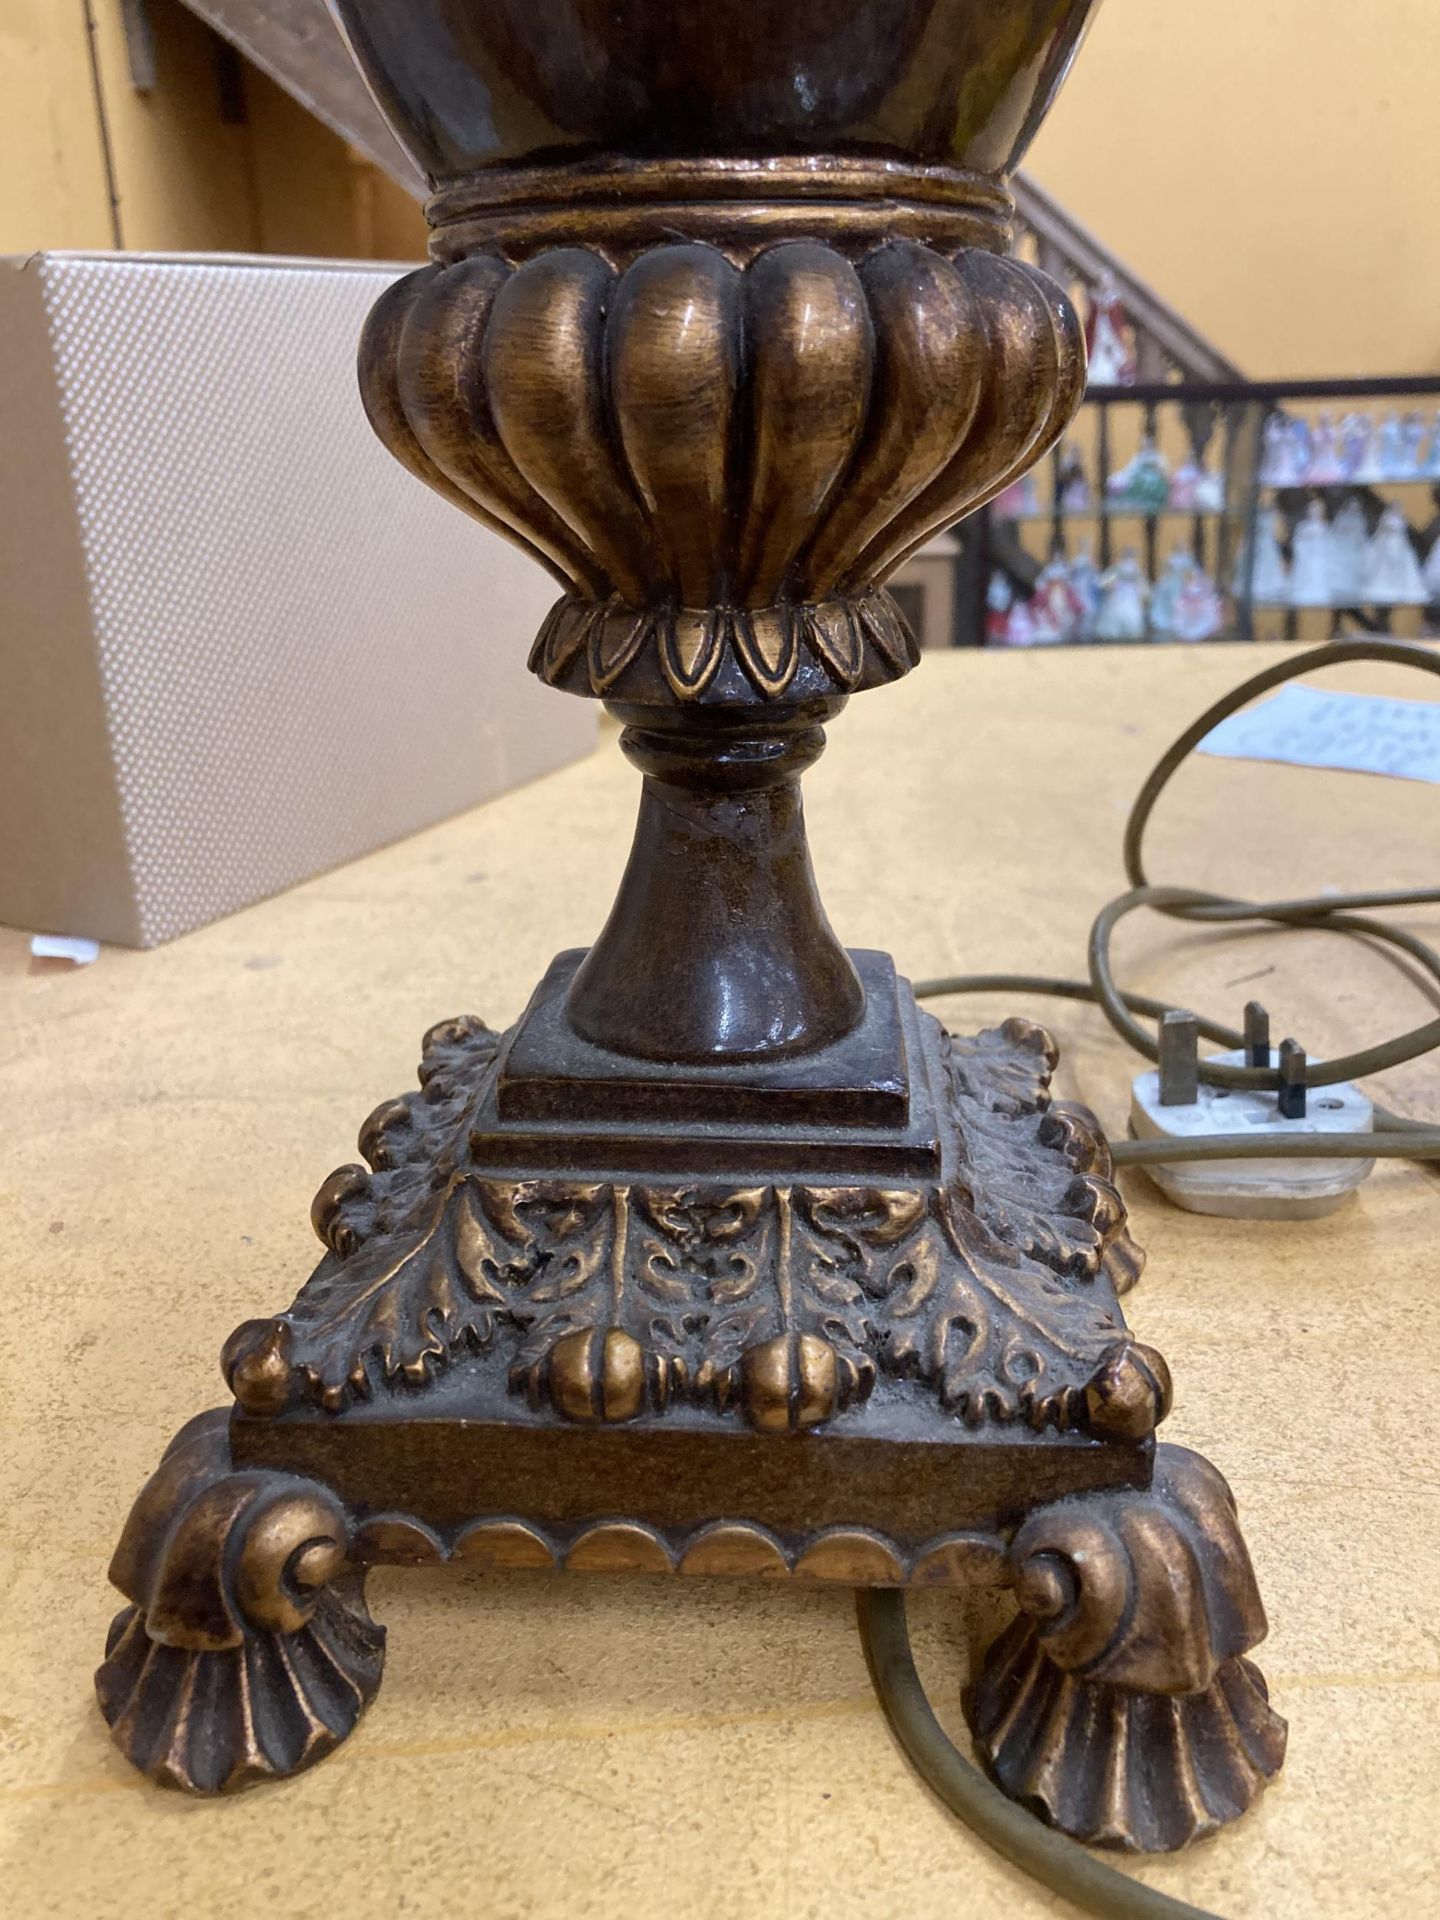 A LARGE FRENCH STYLE BLACK PEDESTAL LAMP WITH FLORAL DESIGN AND METAL MOUNTS - Image 3 of 3